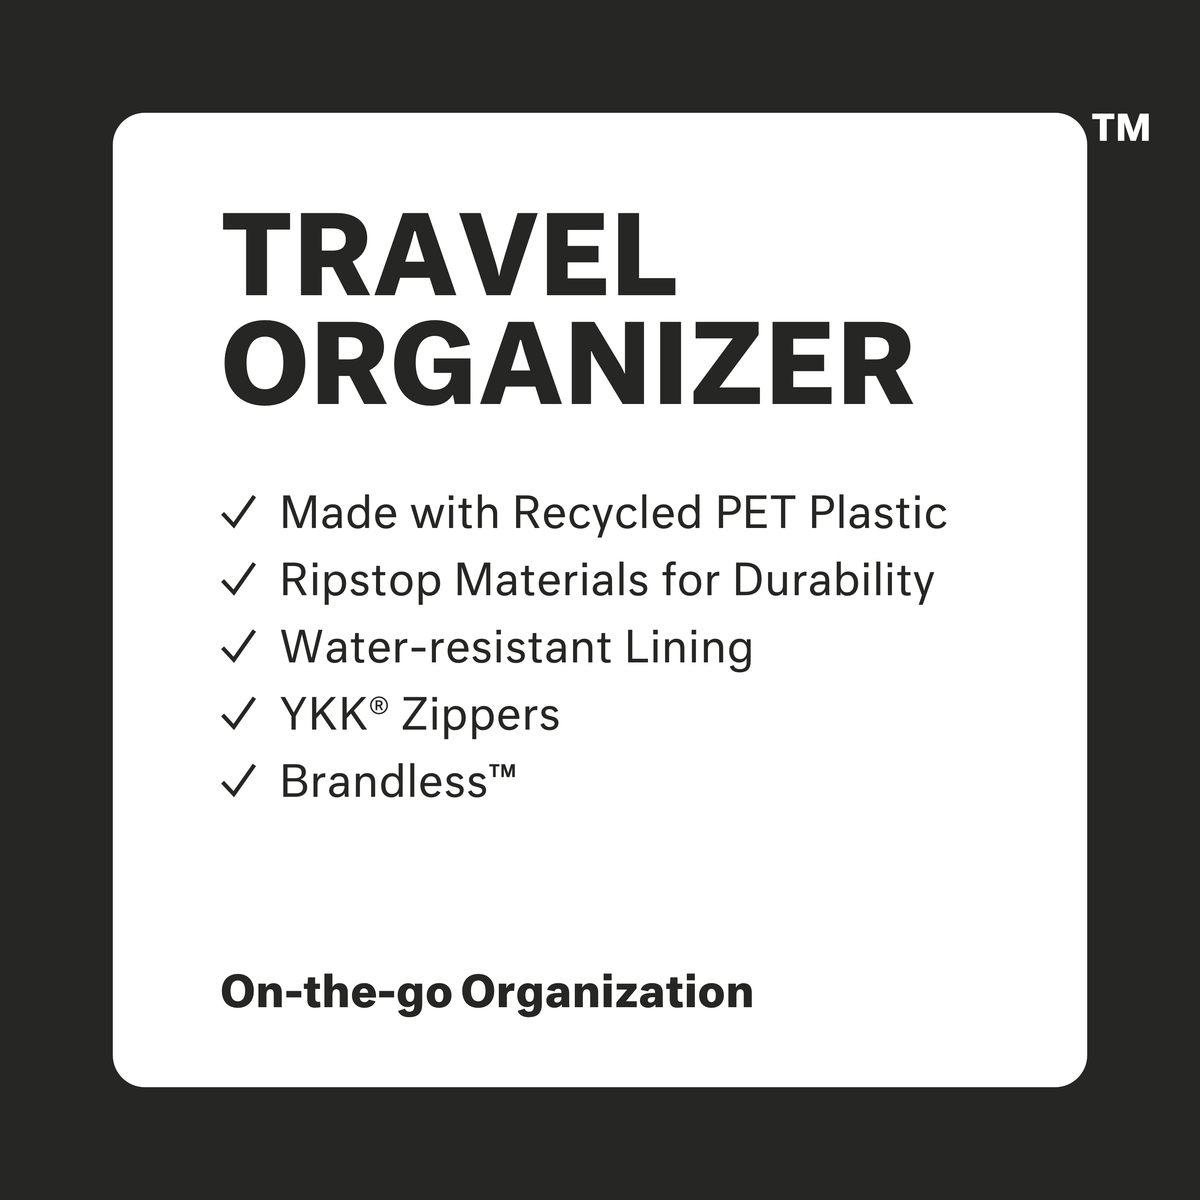 Travel Organizer: made with recycled PET plastic, ripstop materials for durabiliy, water-resistant lining, ykk zippers, brandless. On-the-go organization.